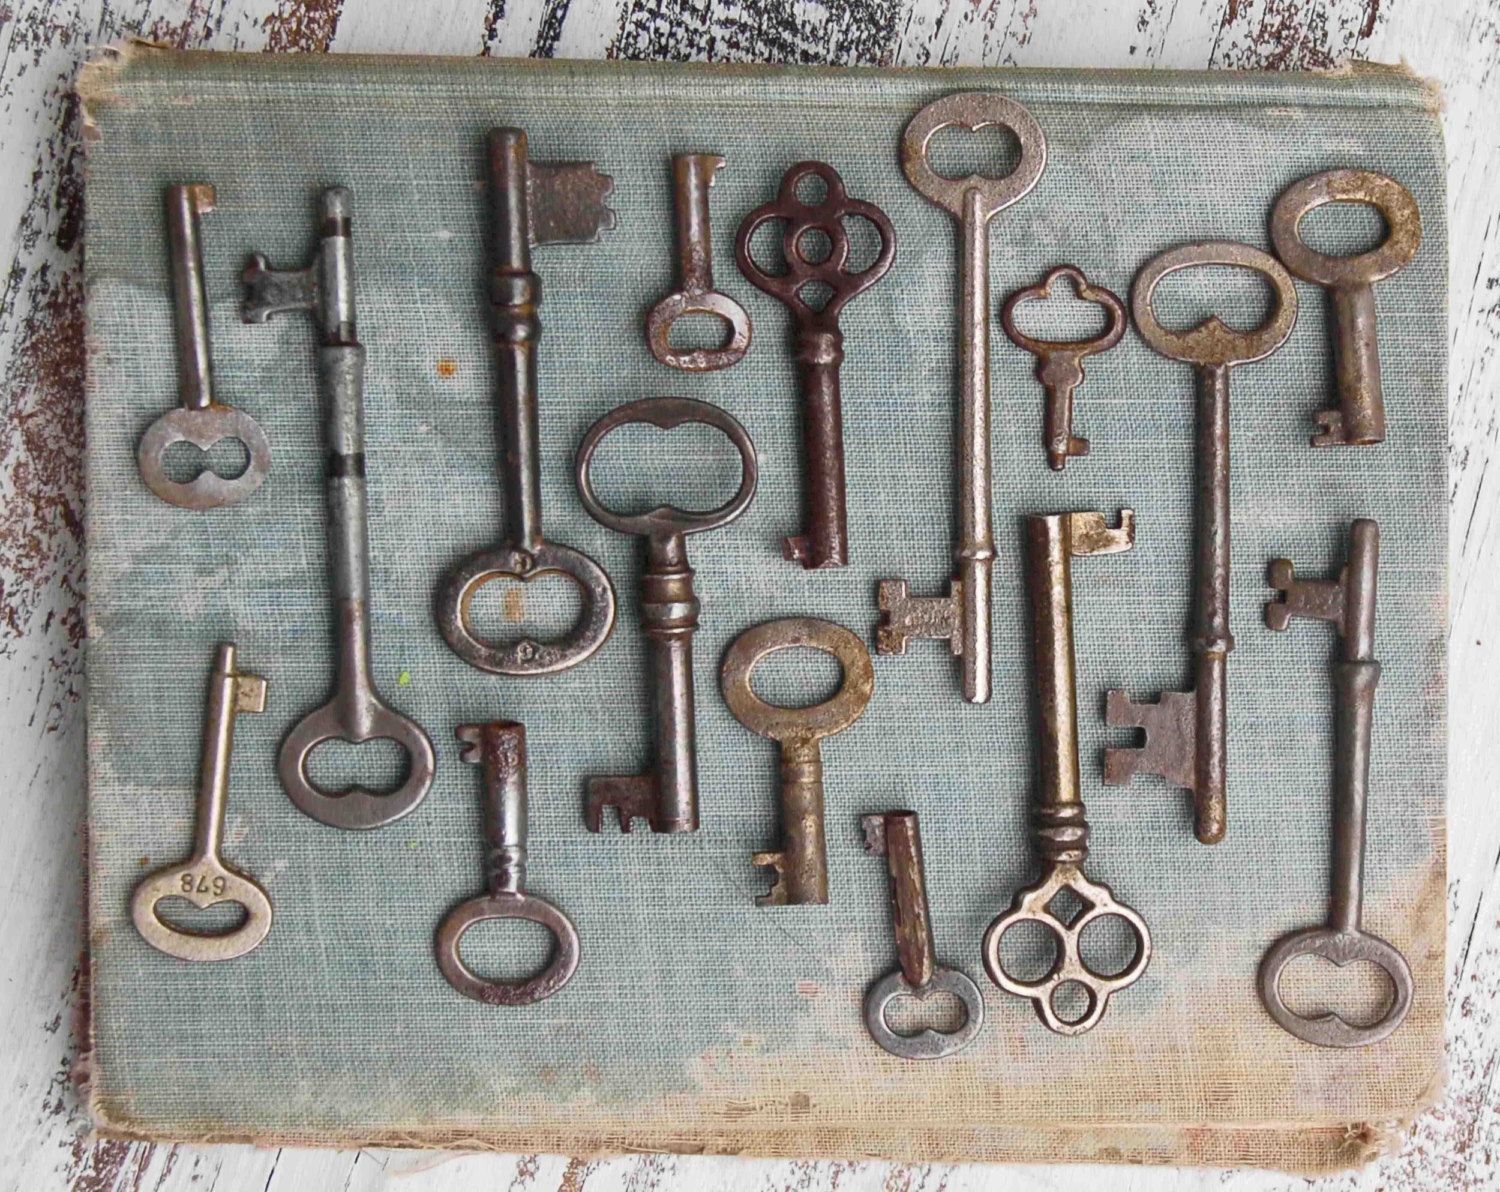 Vintage Key Collection Antique Keys Photograph Rustic Wall Art Pertaining To Vintage Wall Art (View 16 of 20)